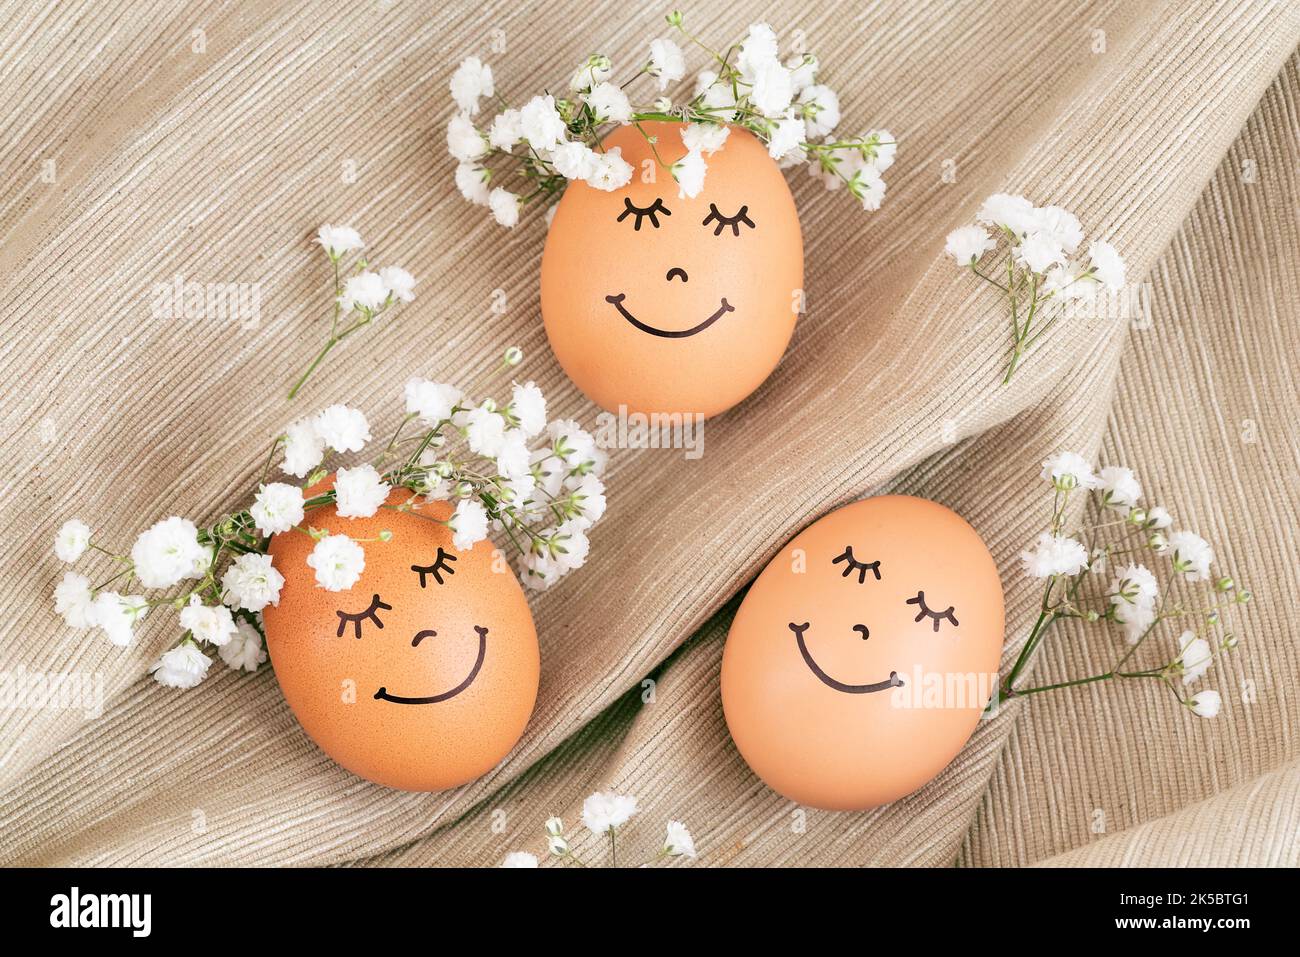 Three happy Easter eggs with cute faces in floral wreath crowns on brown burlap background. Easter eggs with flowers and sleepy eyes in sunny light. H Stock Photo